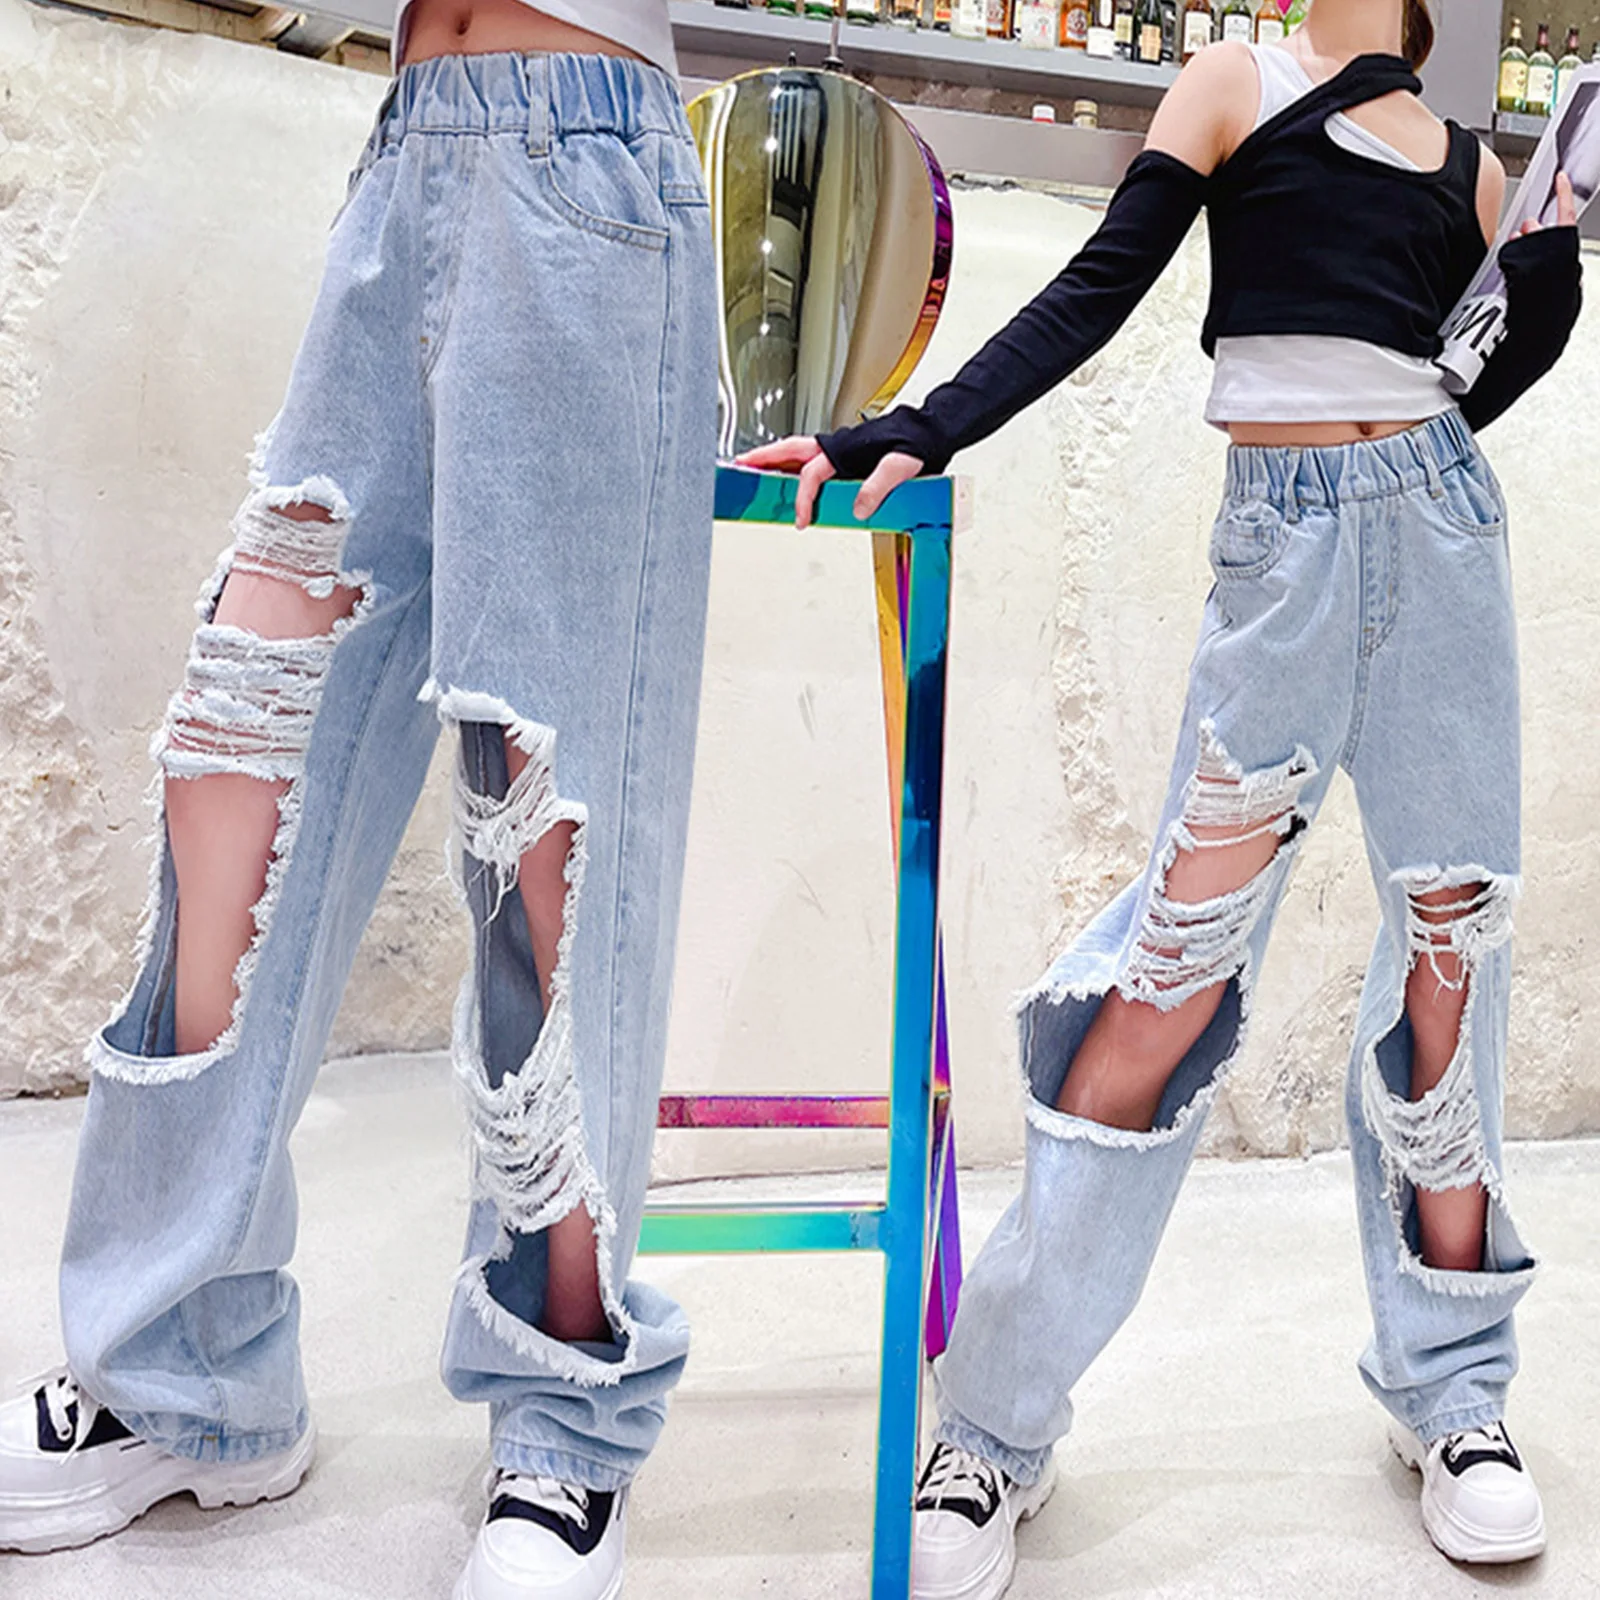 

Kids Distressed Denim Pants Loose Trousers Children's Clothing High Waist Leg Wide Jeans Hole Ripped Pants for Teen Girls 3-15Y